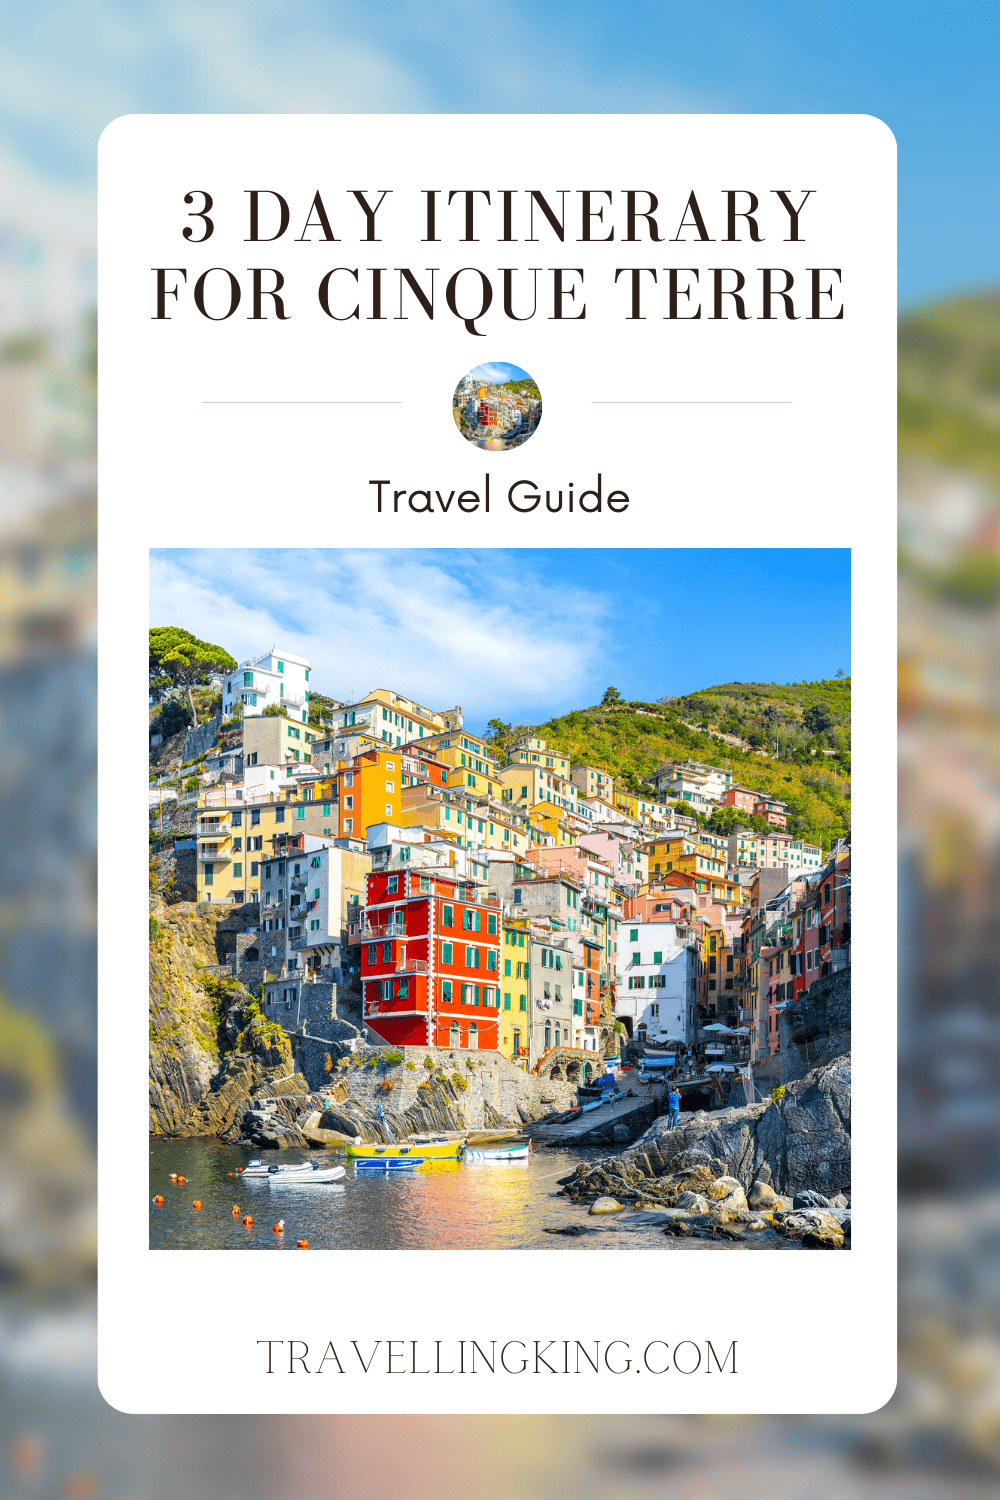 3 day Itinerary for Cinque Terre